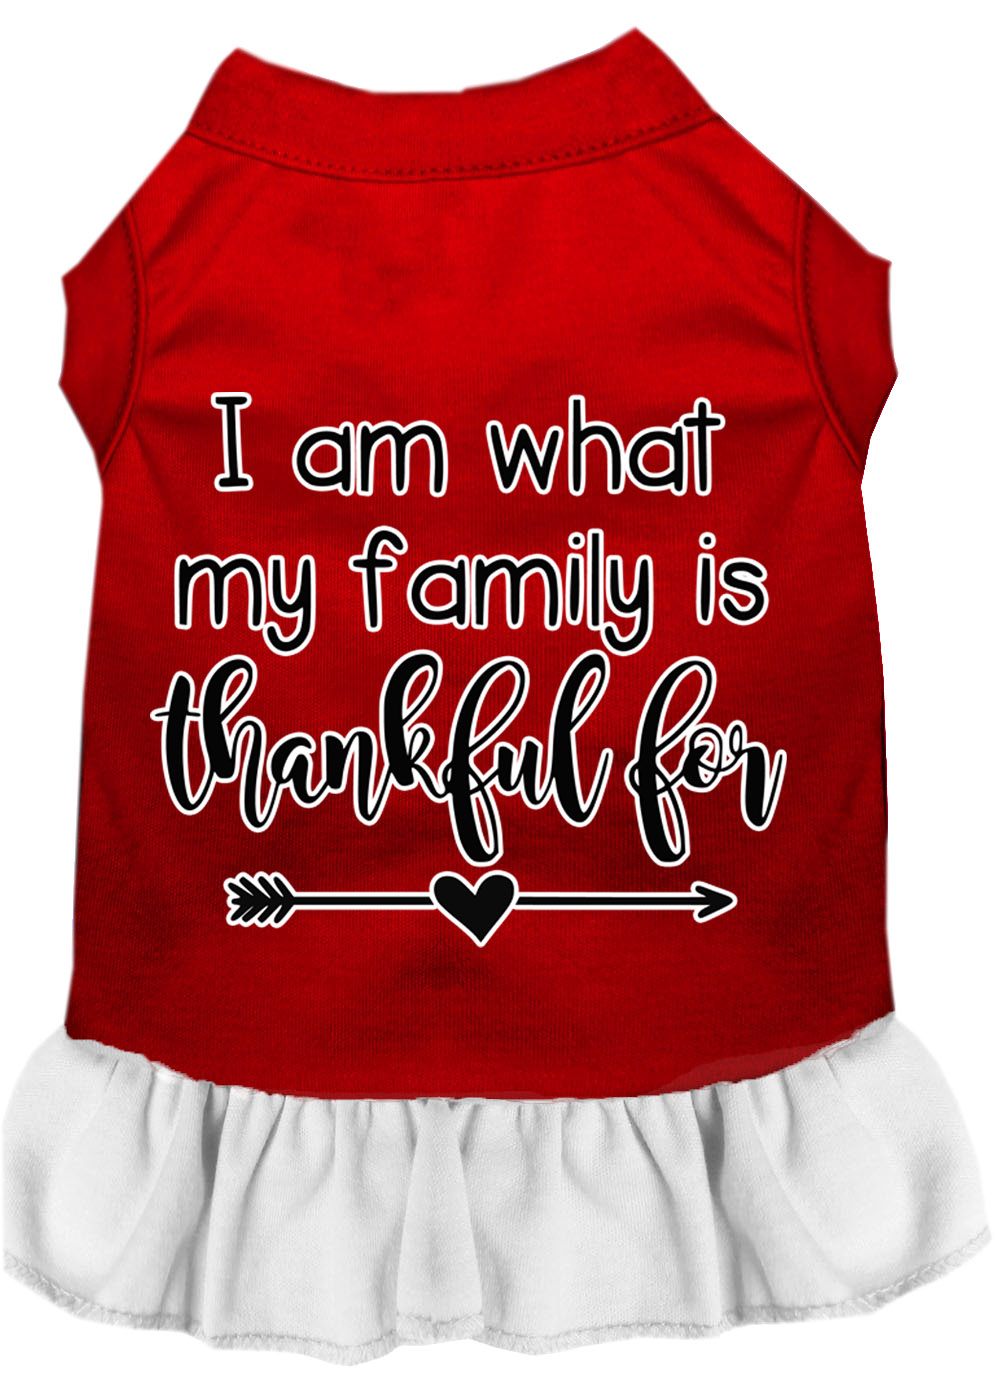 I Am What My Family is Thankful For Screen Print Dog Dress Red with White Lg